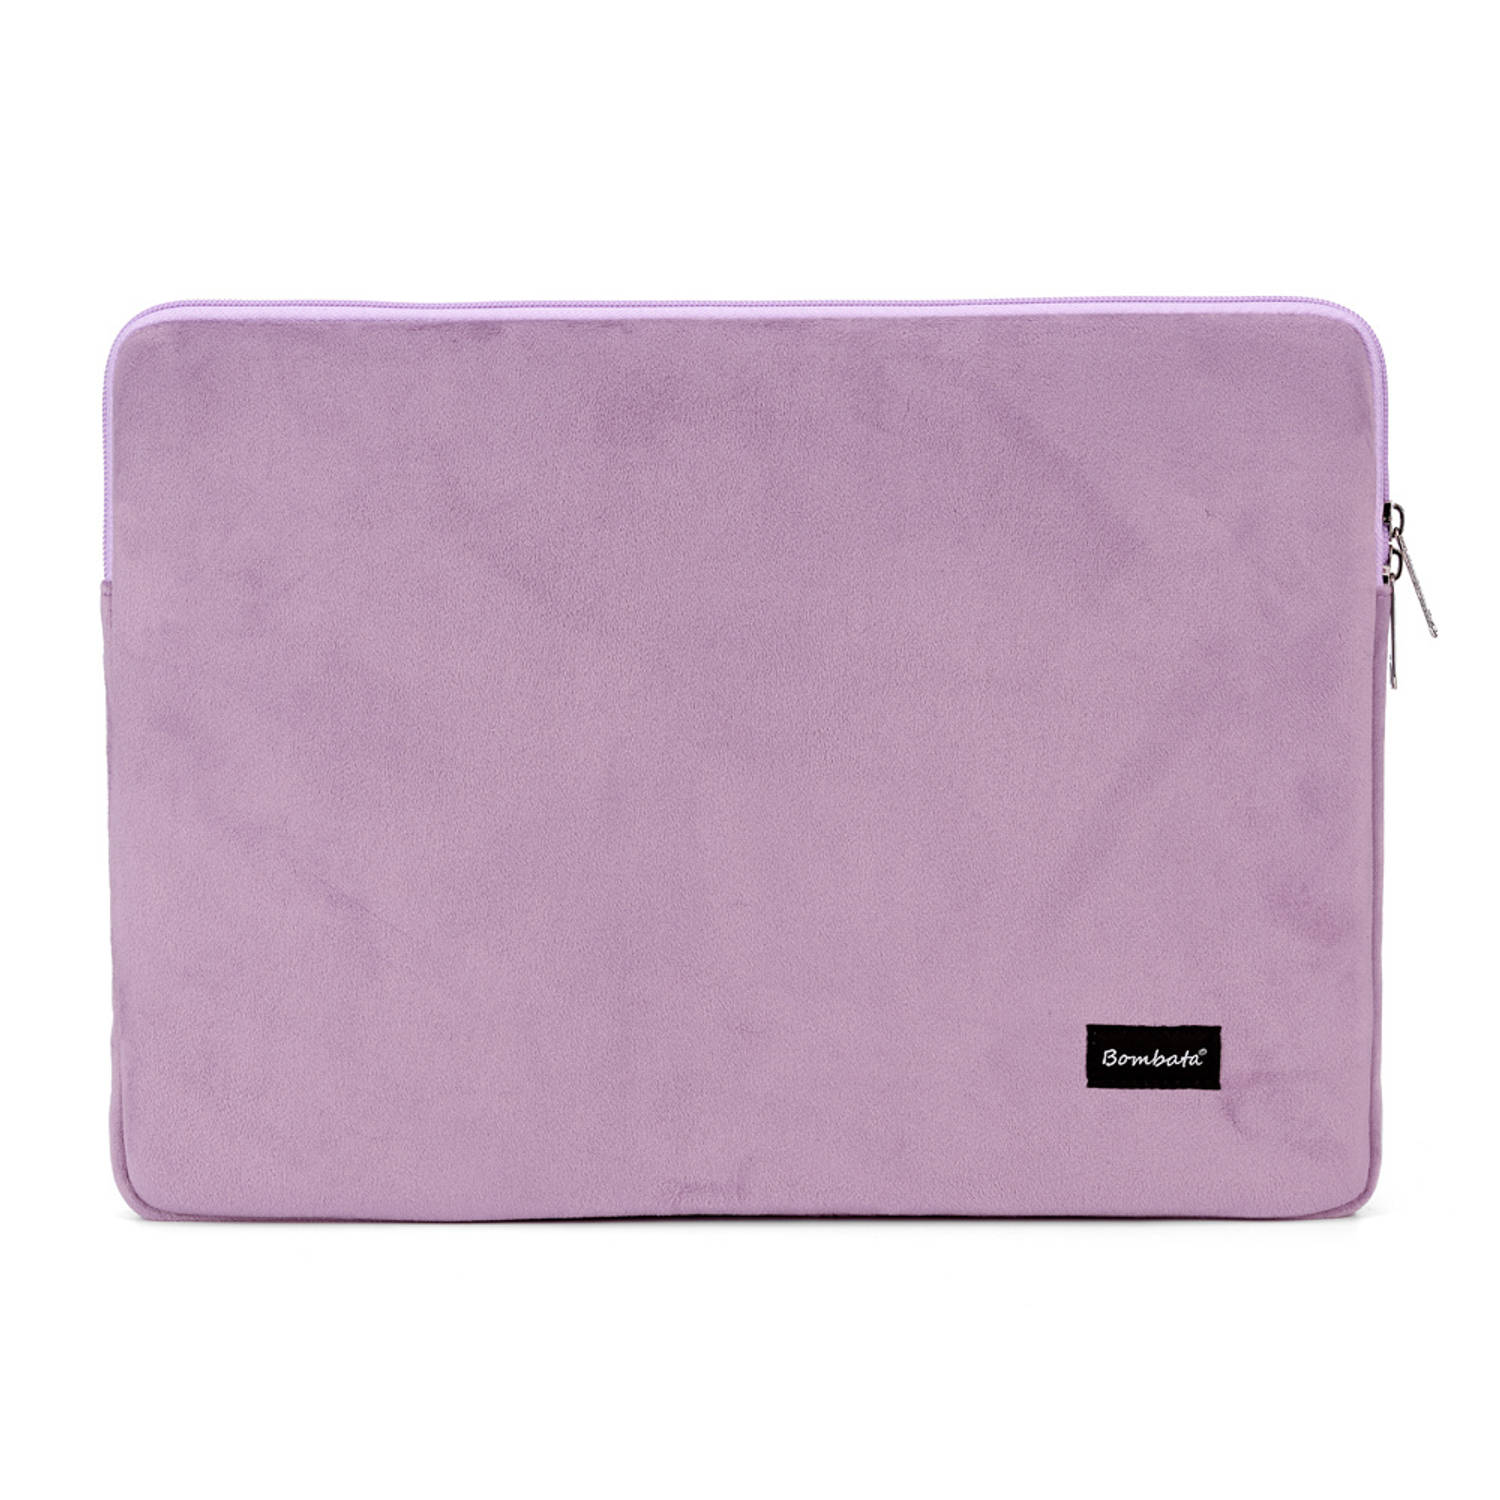 Bombata Universele Velvet Laptophoes Sleeve 15.6 inch-16 inch Lila Paars